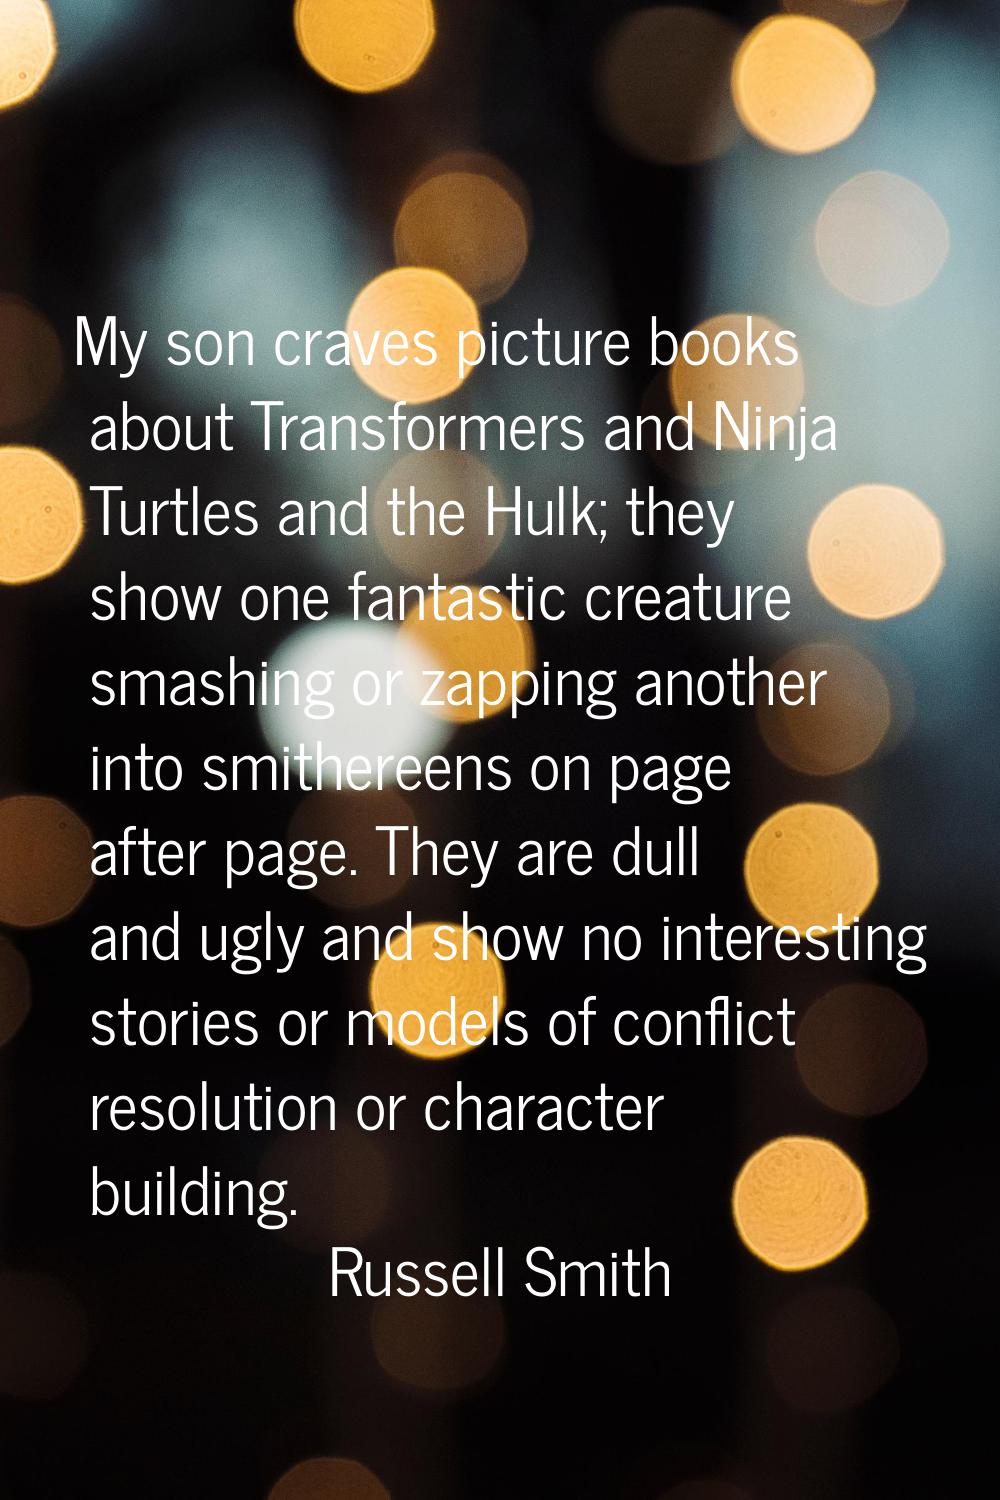 My son craves picture books about Transformers and Ninja Turtles and the Hulk; they show one fantas